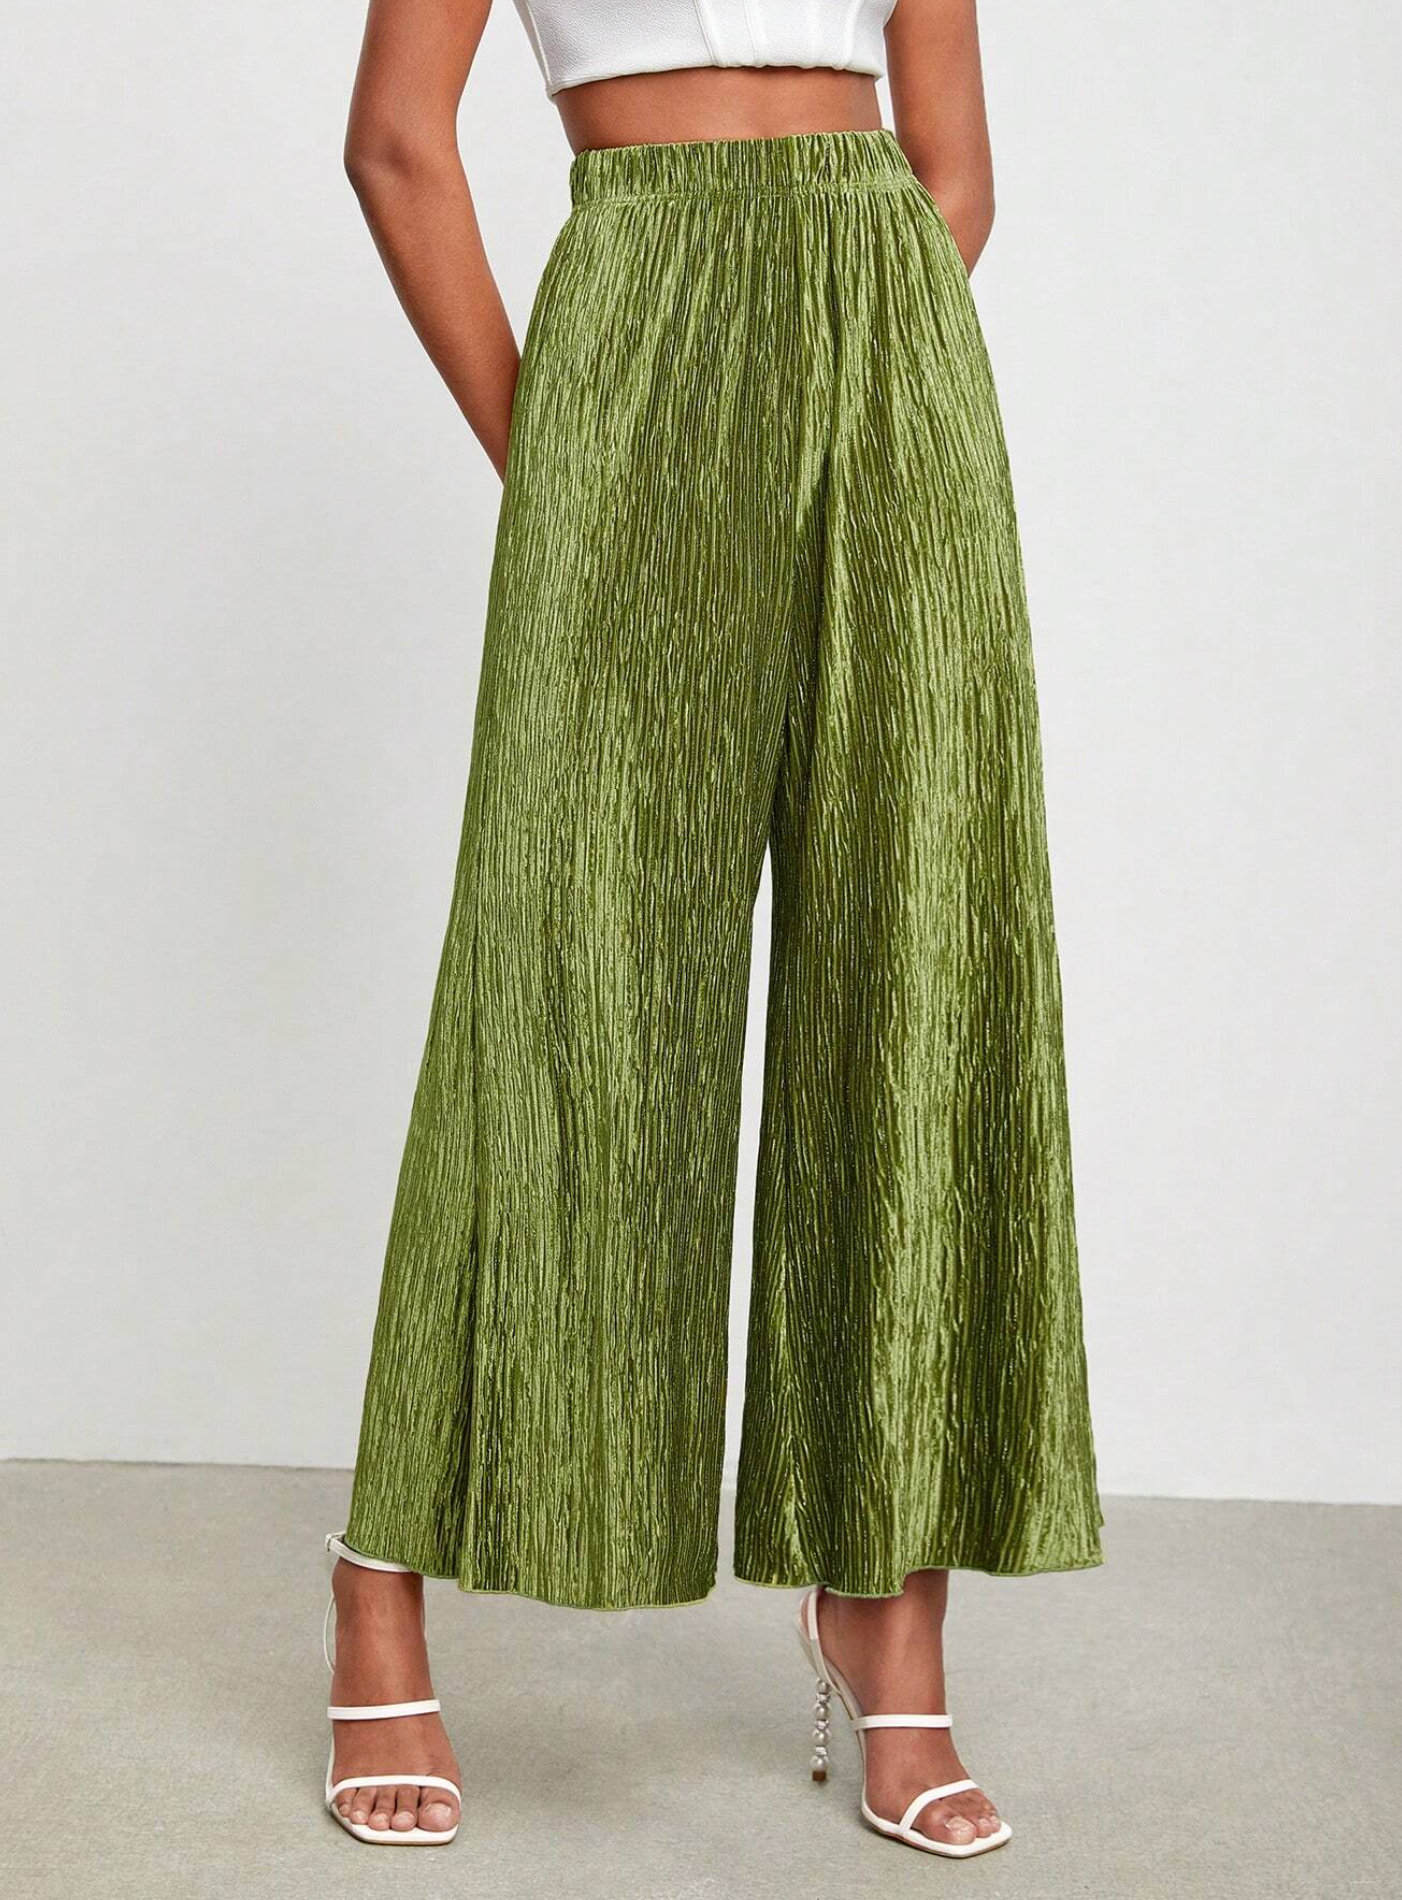 BELANGE HANDMADE X SHEIN - Solid Plisse Wide Leg Pants - Available on SHEIN.COM Only